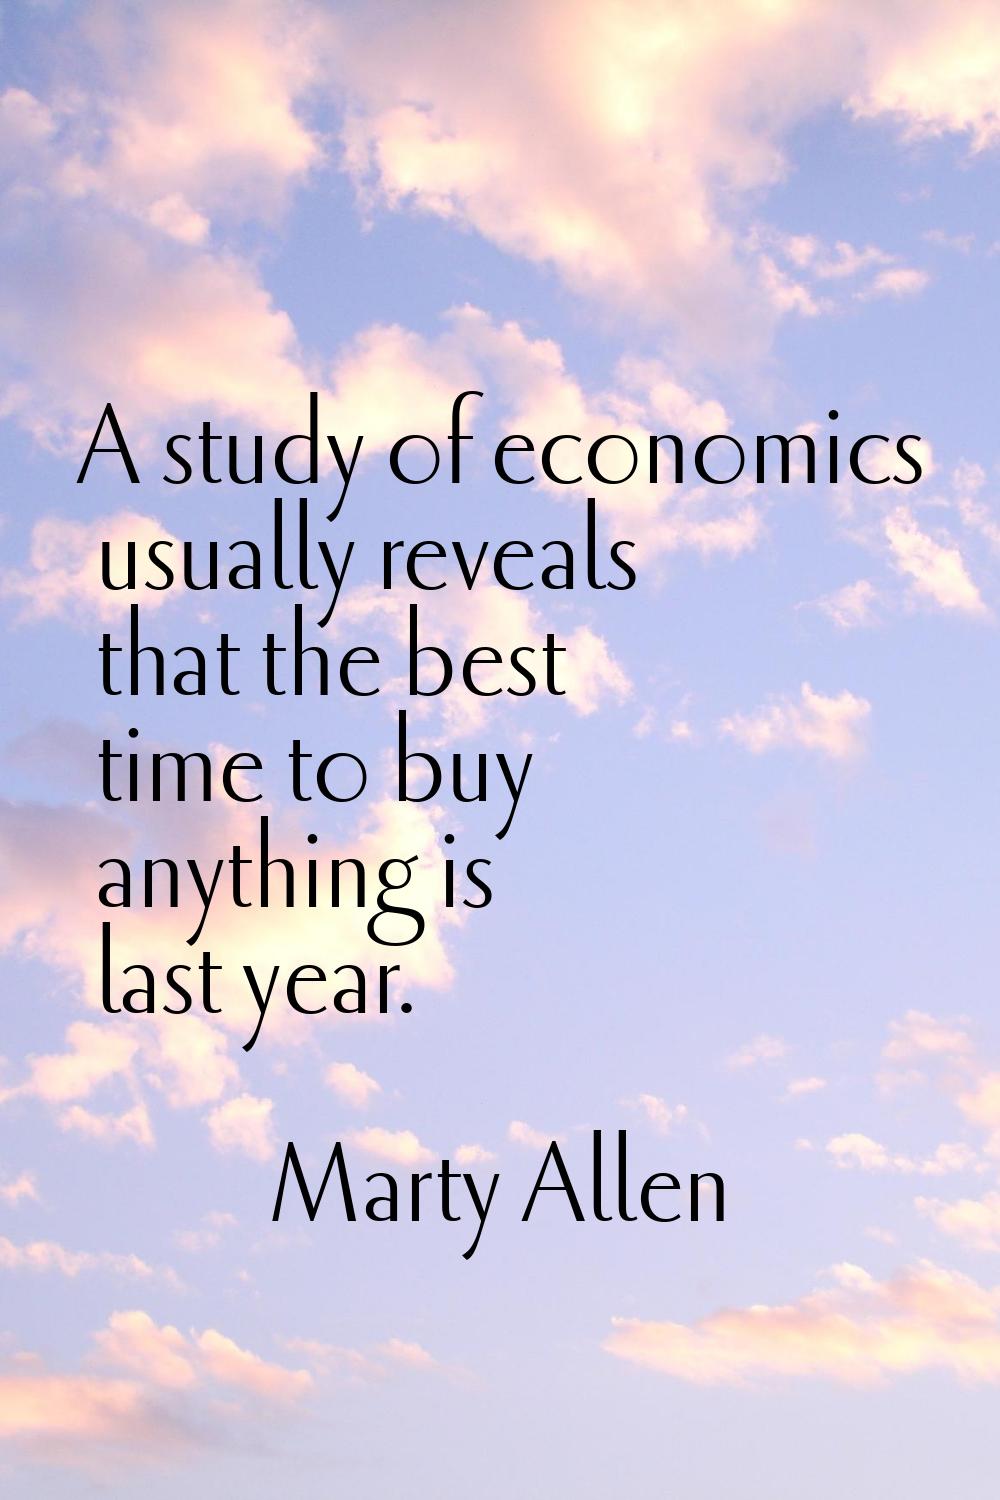 A study of economics usually reveals that the best time to buy anything is last year.